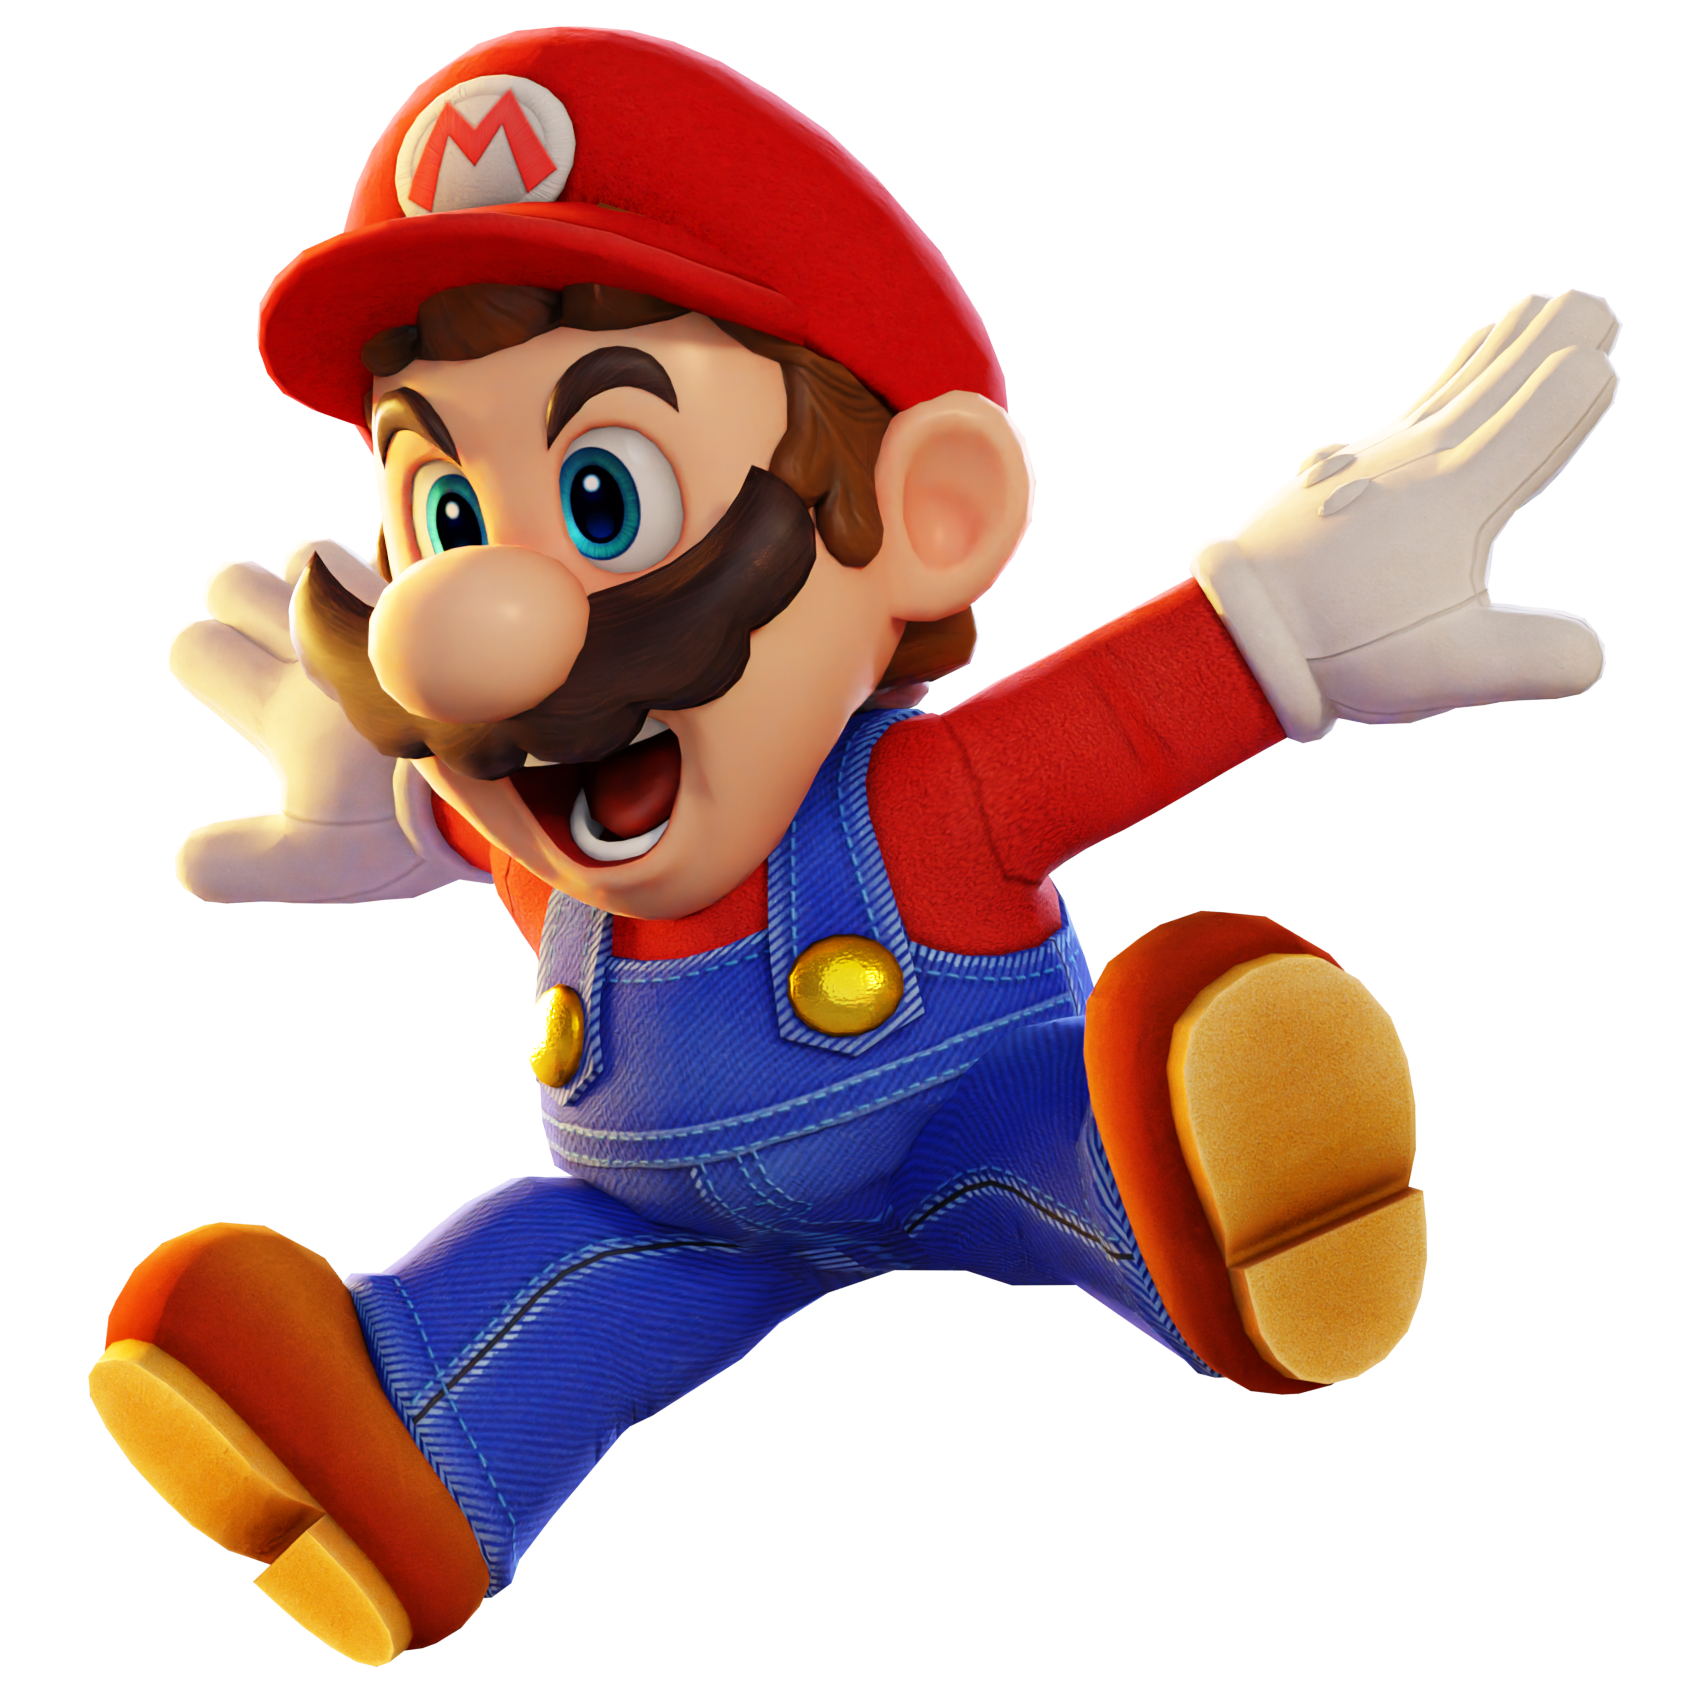 mario games for free world wide web unfair